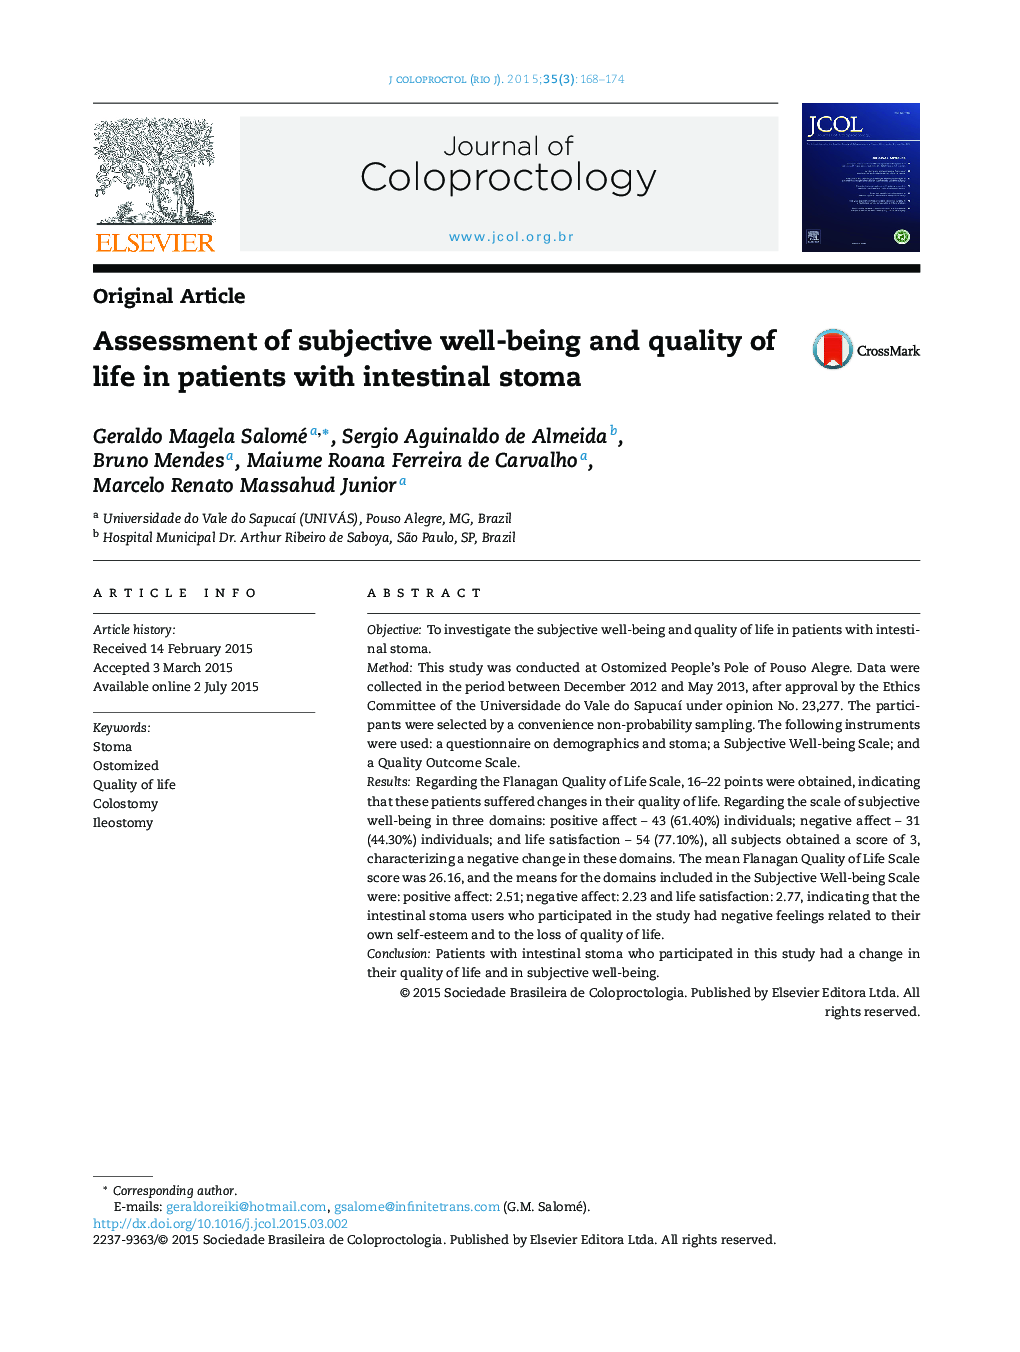 Assessment of subjective well-being and quality of life in patients with intestinal stoma